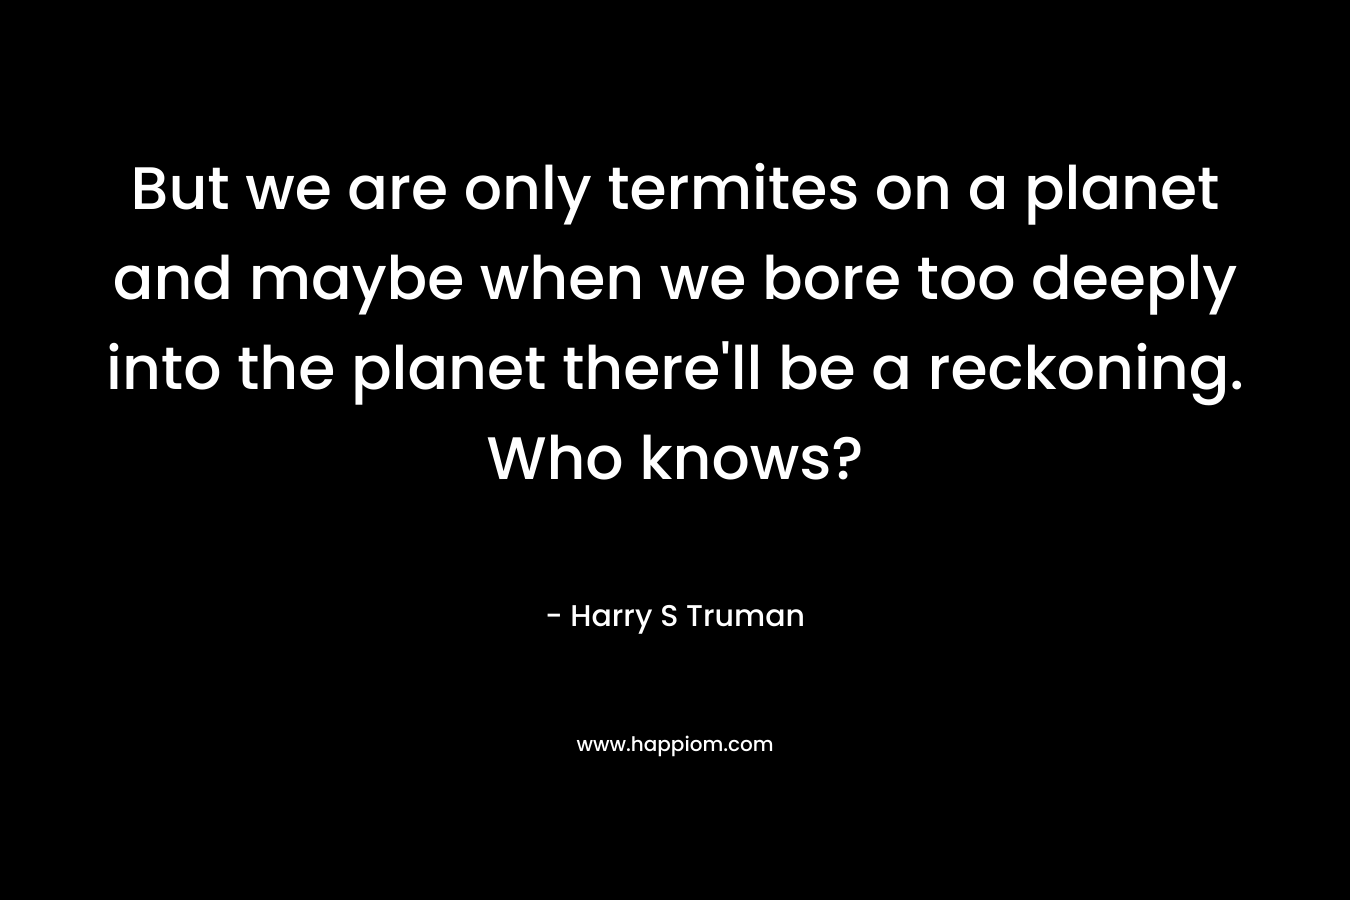 But we are only termites on a planet and maybe when we bore too deeply into the planet there’ll be a reckoning. Who knows? – Harry S Truman